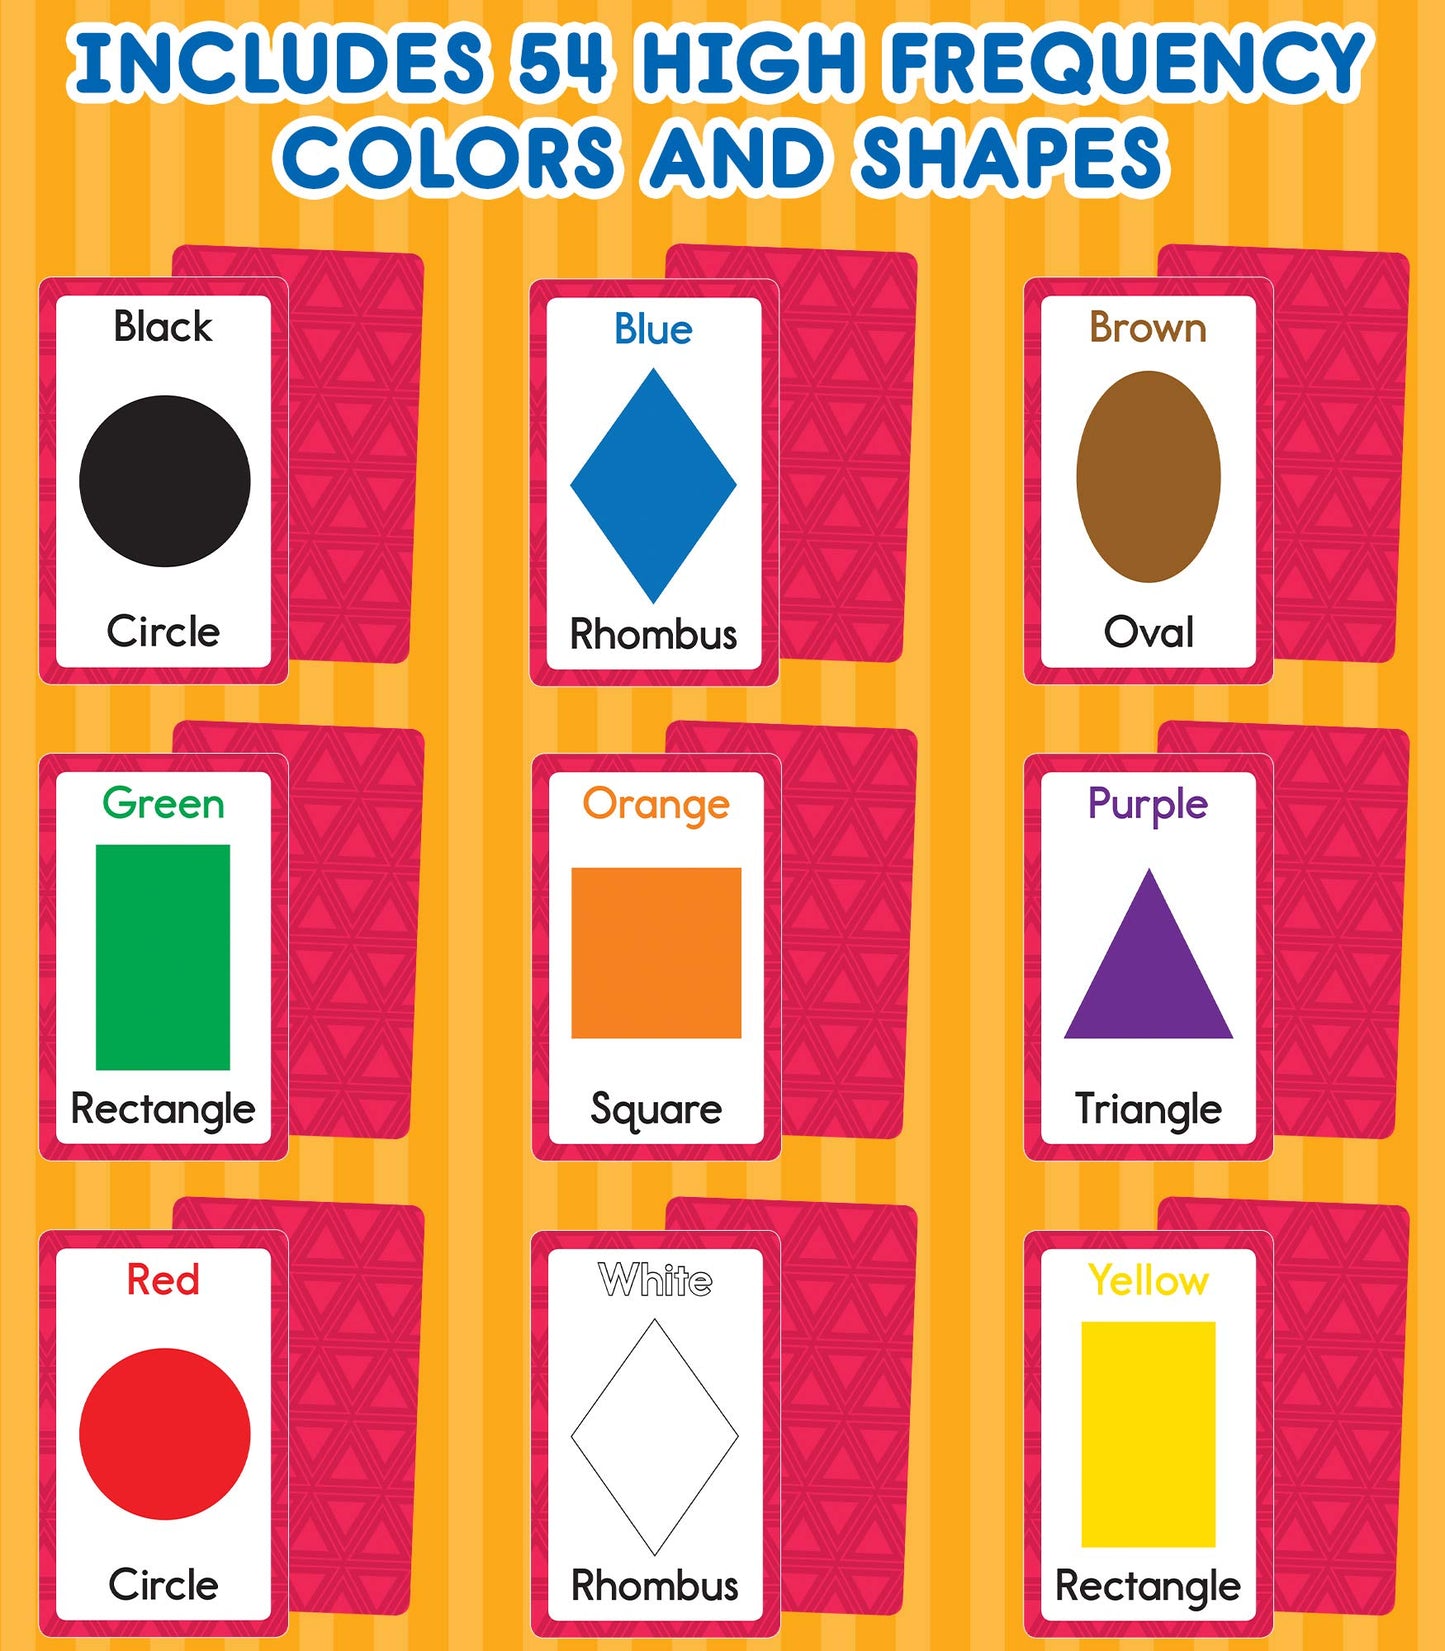 Colors & Shapes Flashcards 52